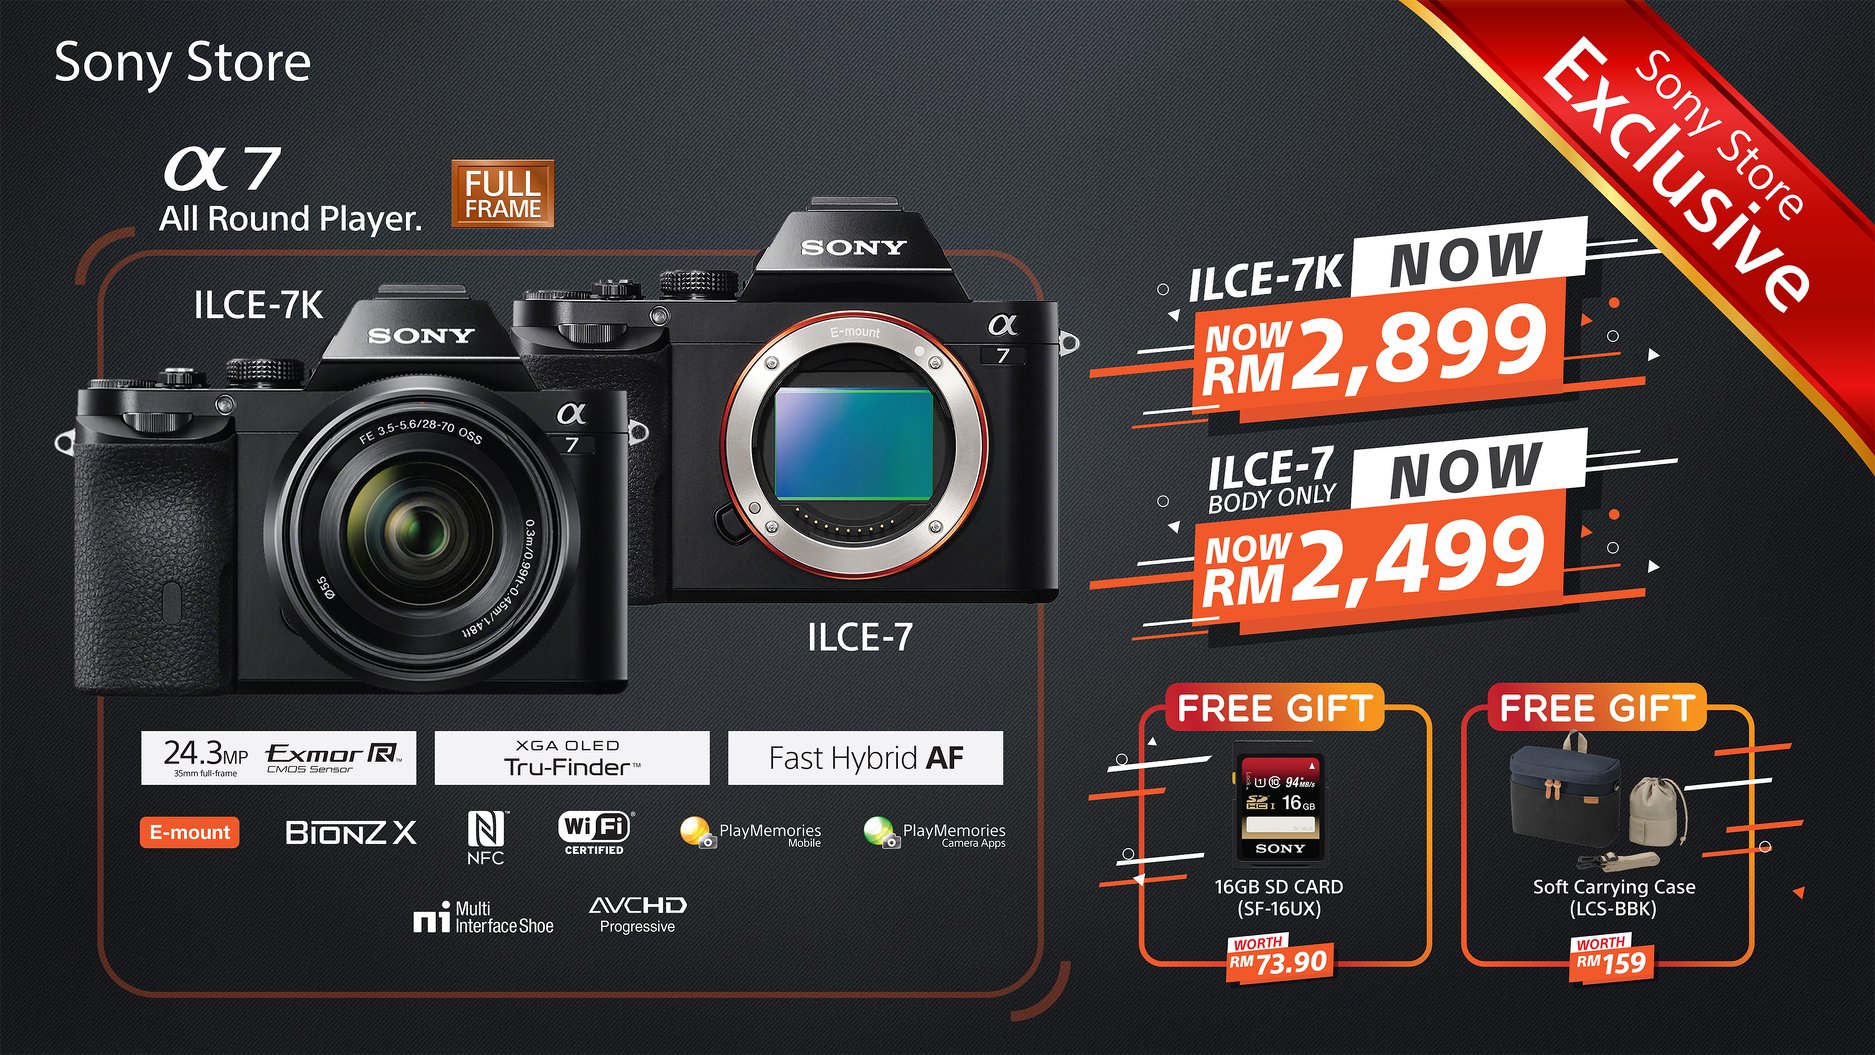 Grab the Sony A7 and free gifts starting from only RM2499